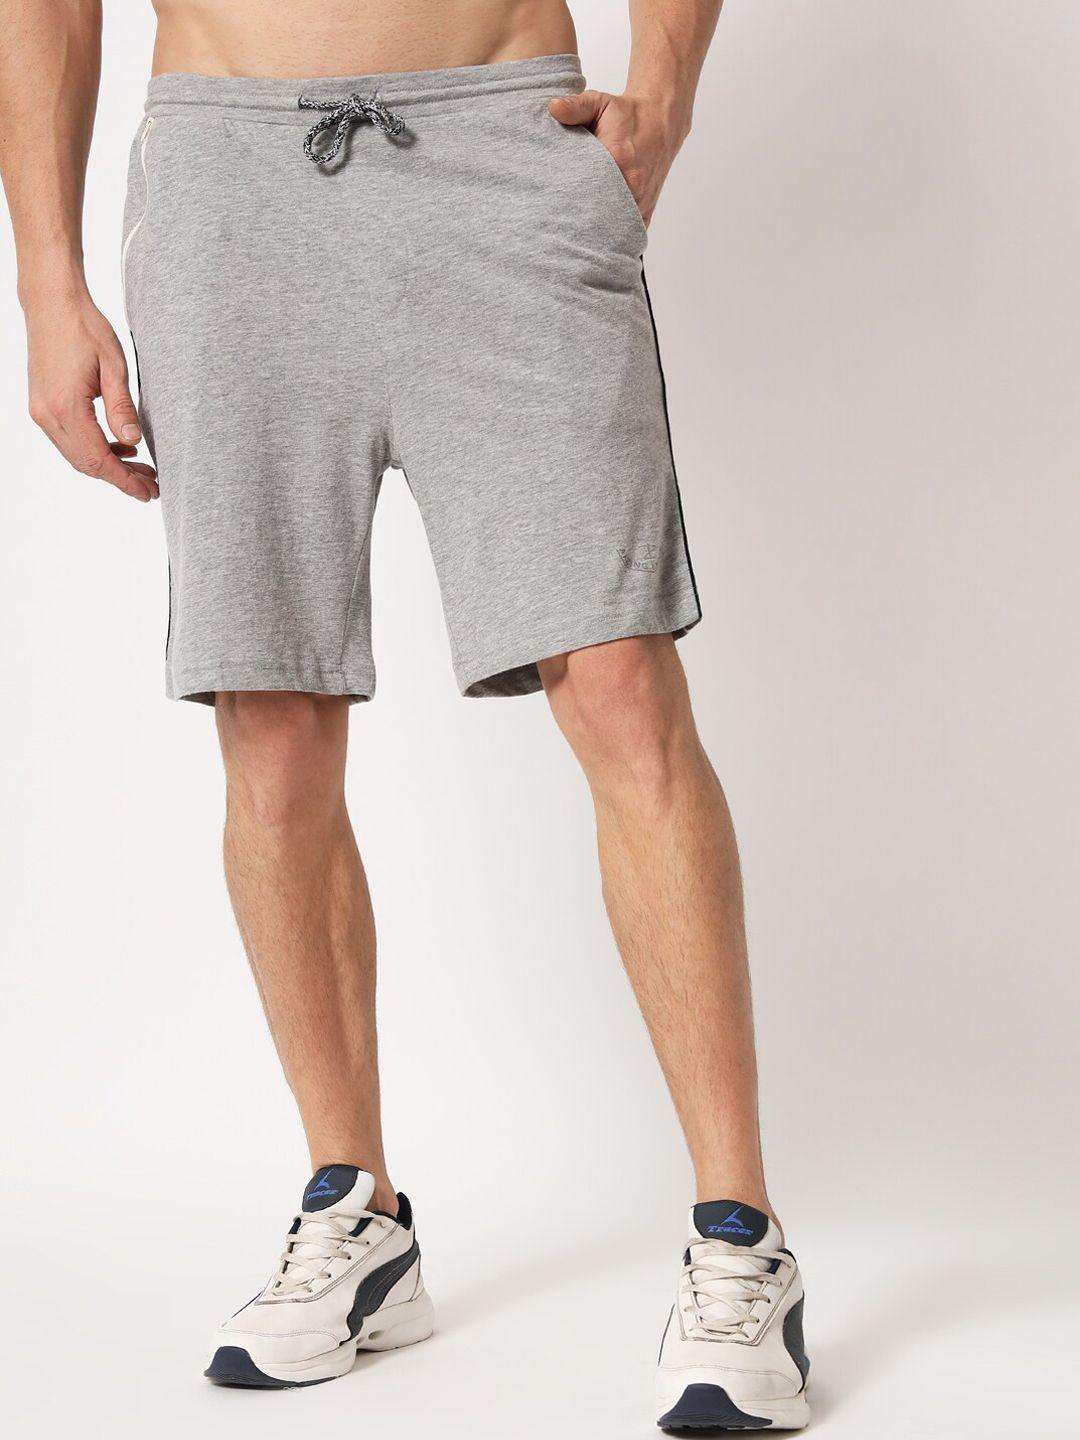 aazing london men grey solid cotton sports shorts